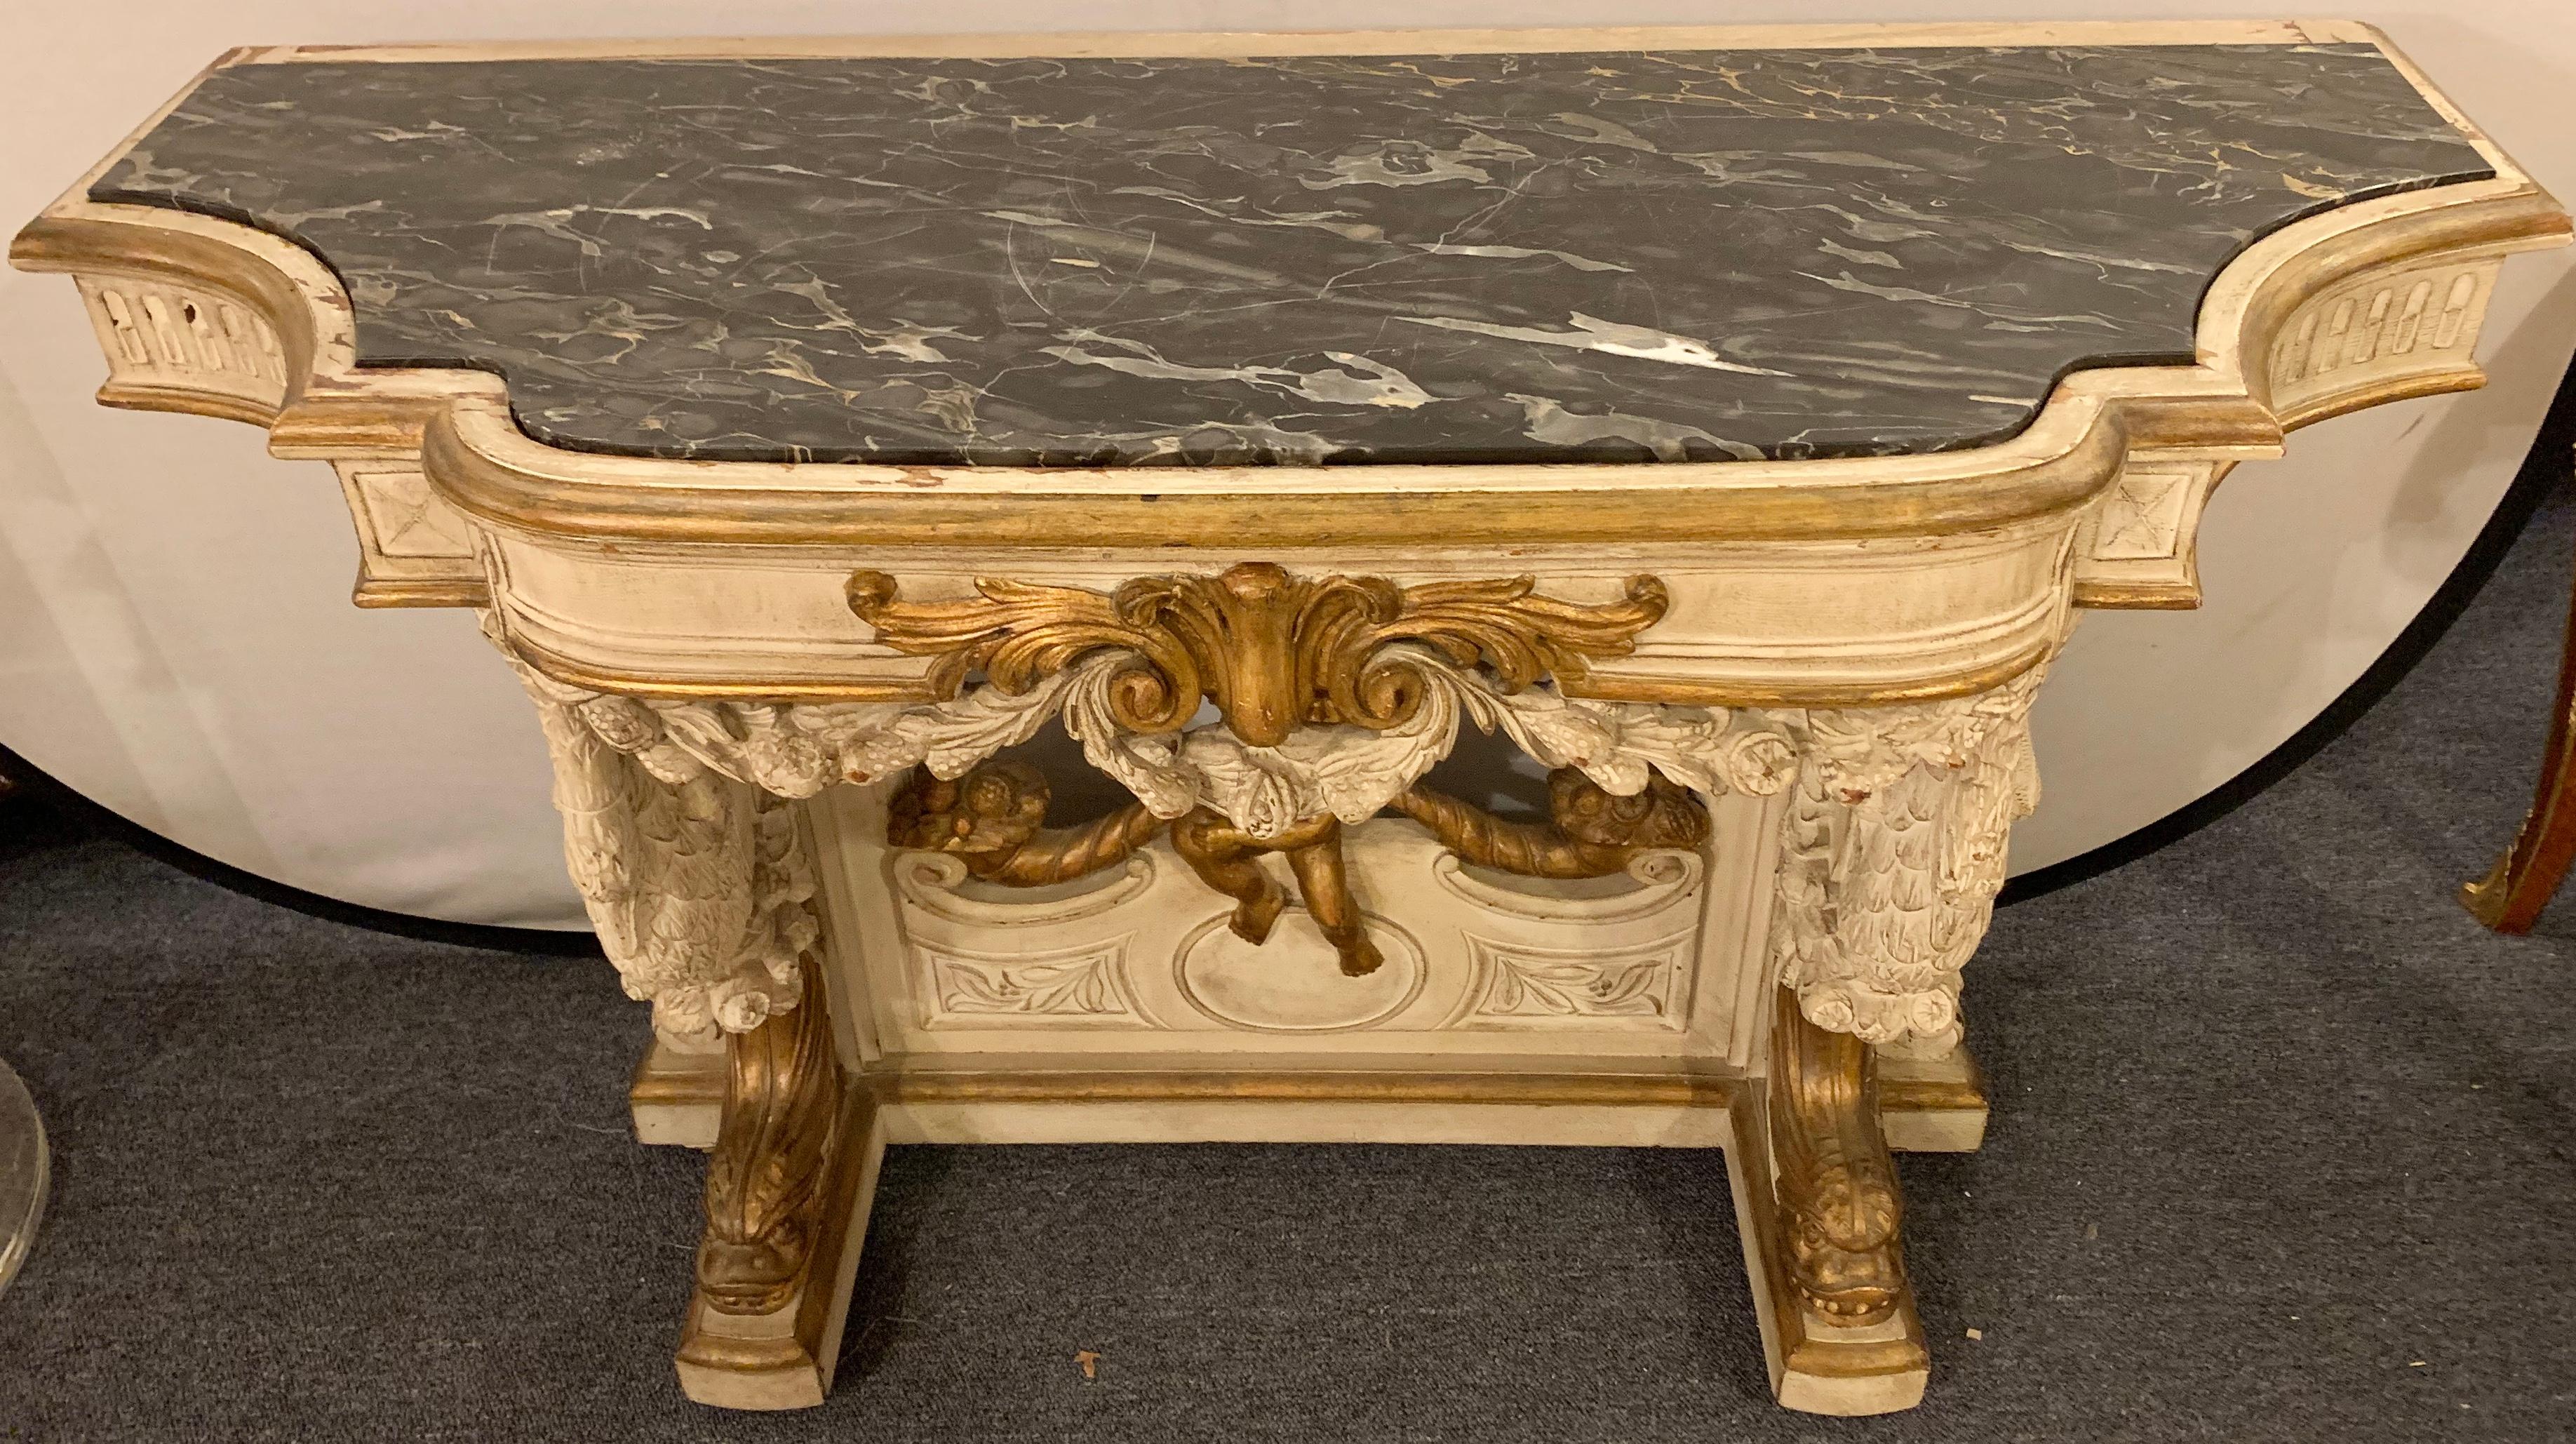 19th-20th century painted and parcel gilt console sideboard or server. A spectacular carved and painted console table having a black and gray white veined marble top above a base of gilt dolphins and cherub.

Greg
4500/EXAX.